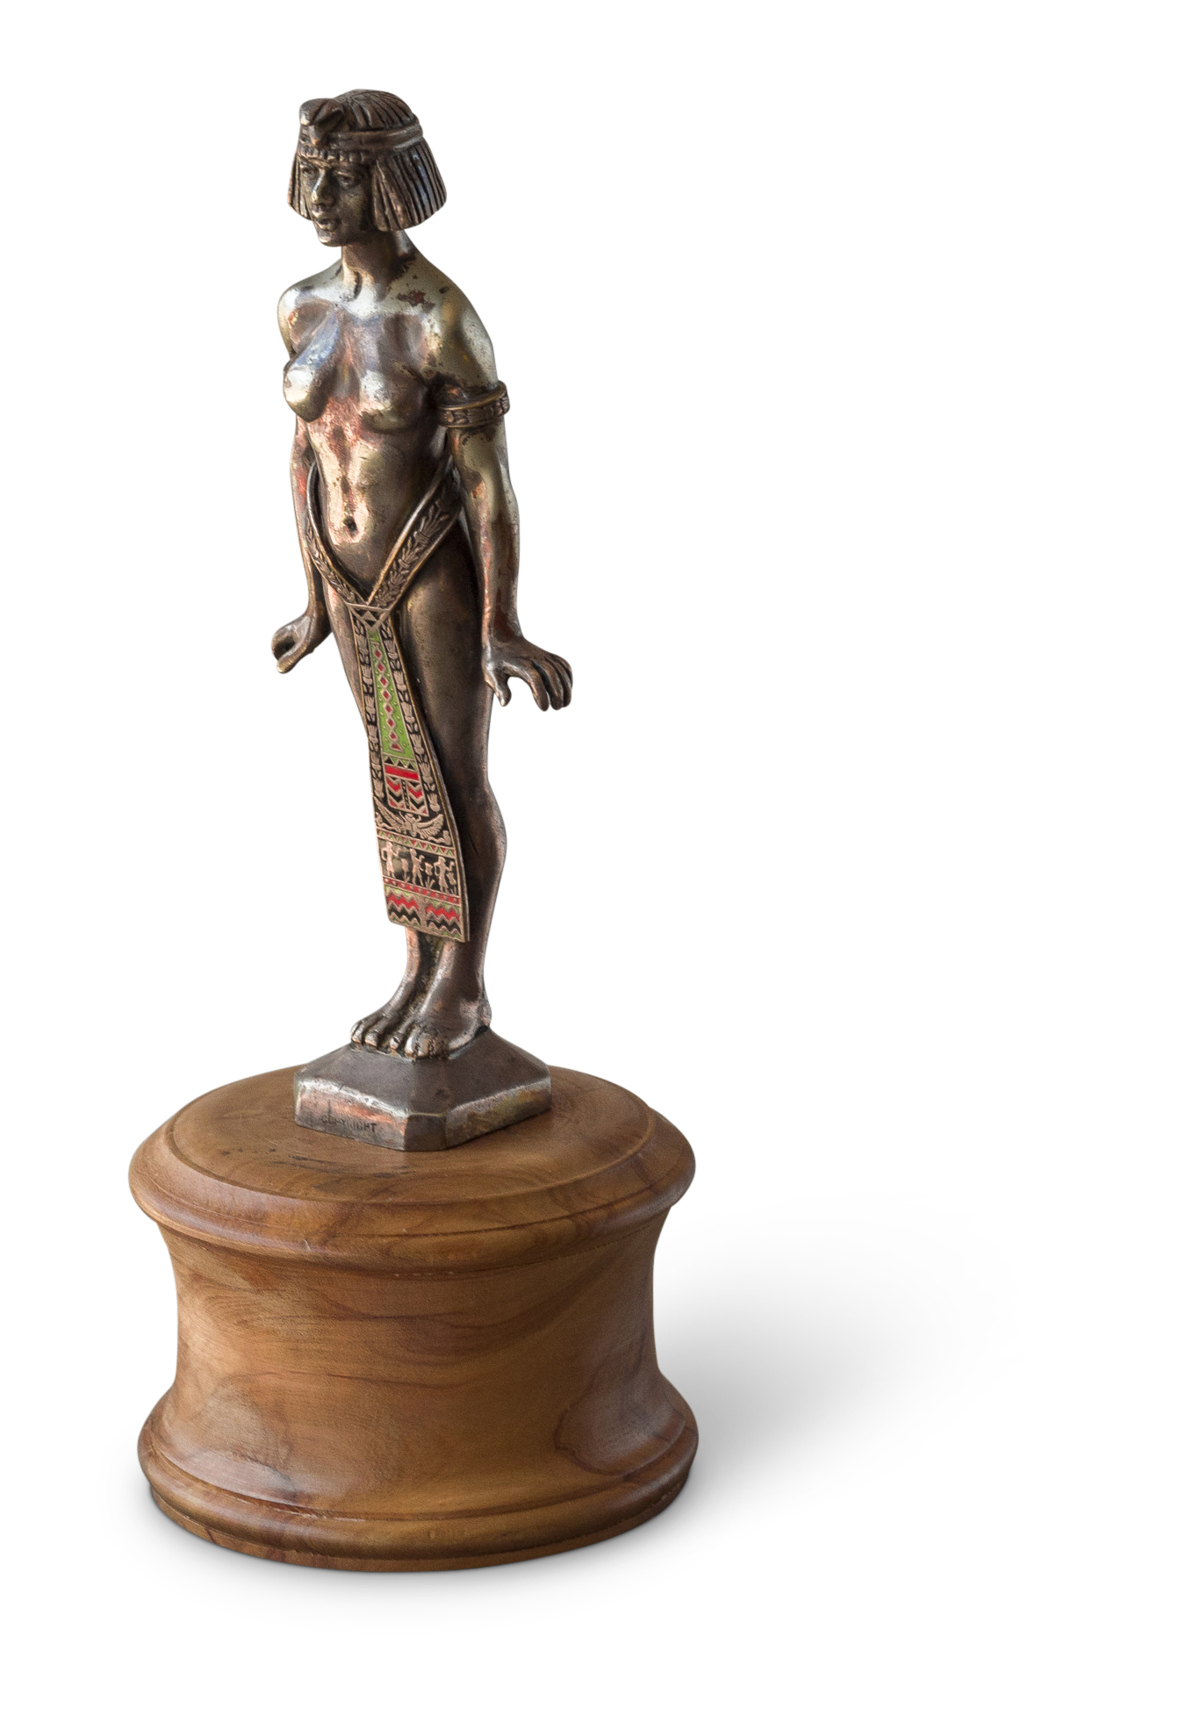 Egyptienne Mascot ca. 1920s-1930s offered at RM Sotheby's The Mitosinka Collection online auction 2020